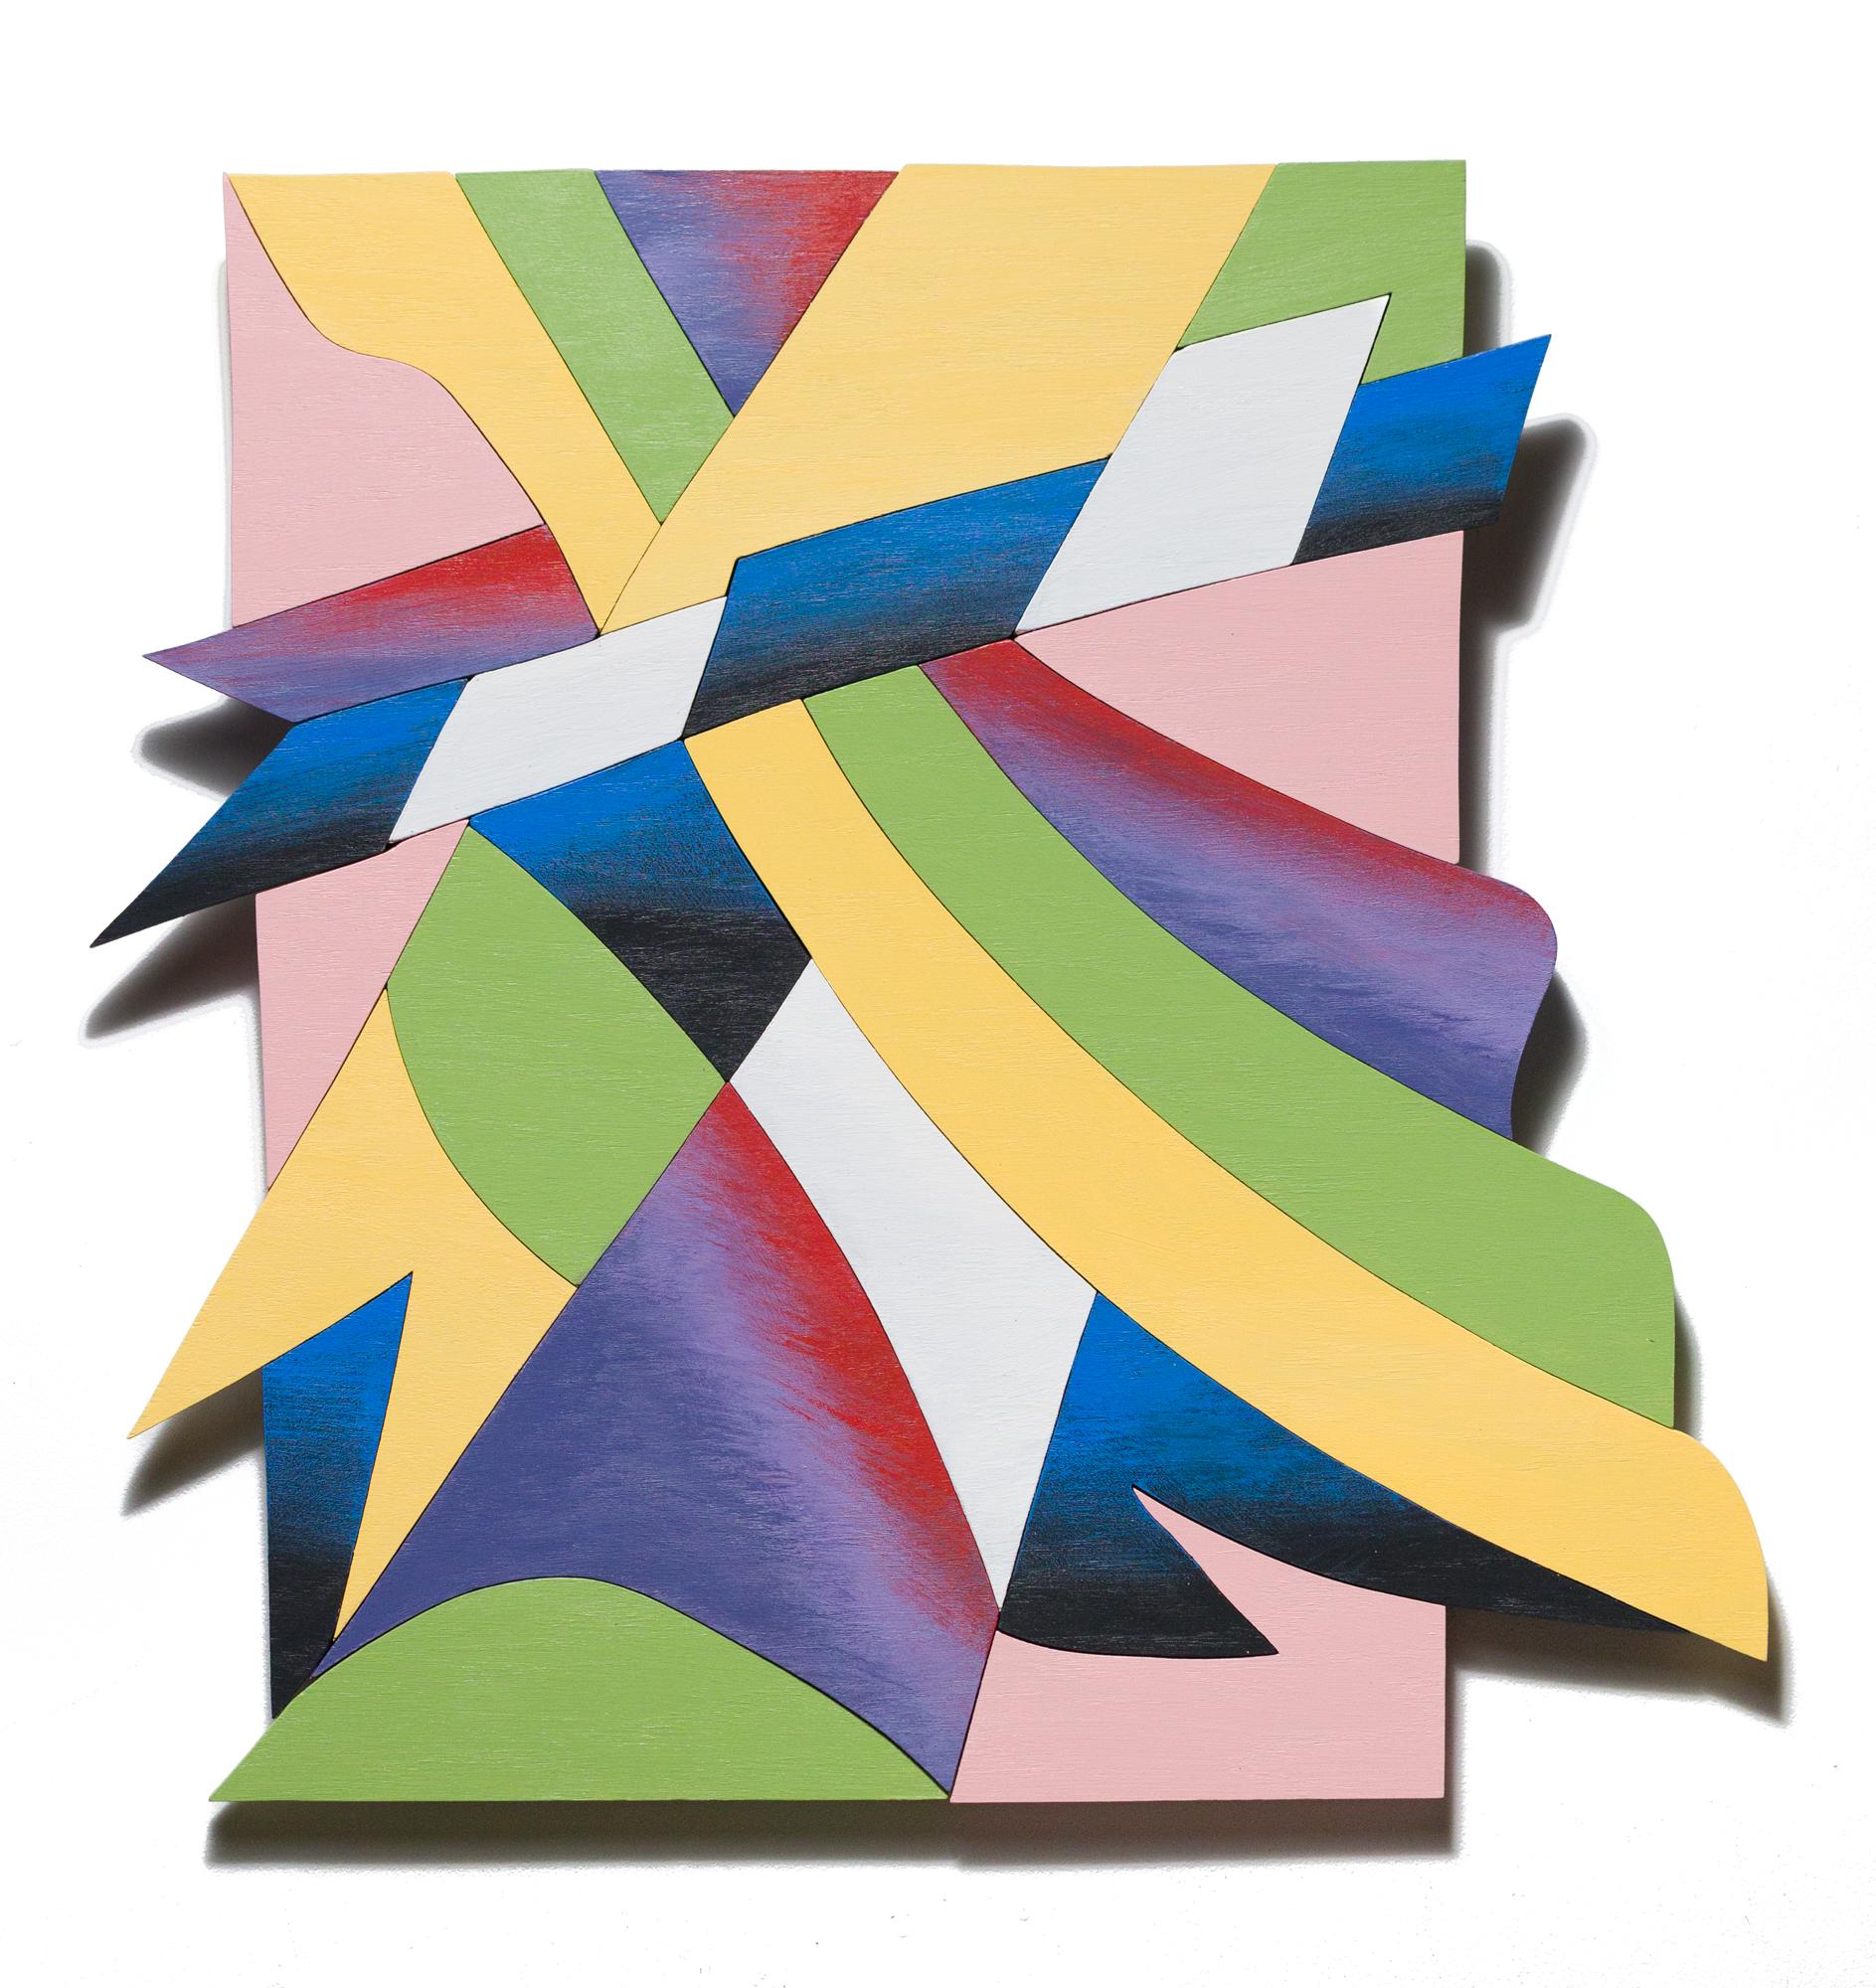 Angela Rio Abstract Painting - "Fragments 4", Abstract Patterns, Assembled Hand-Cut Oak, Wood collage sculpture